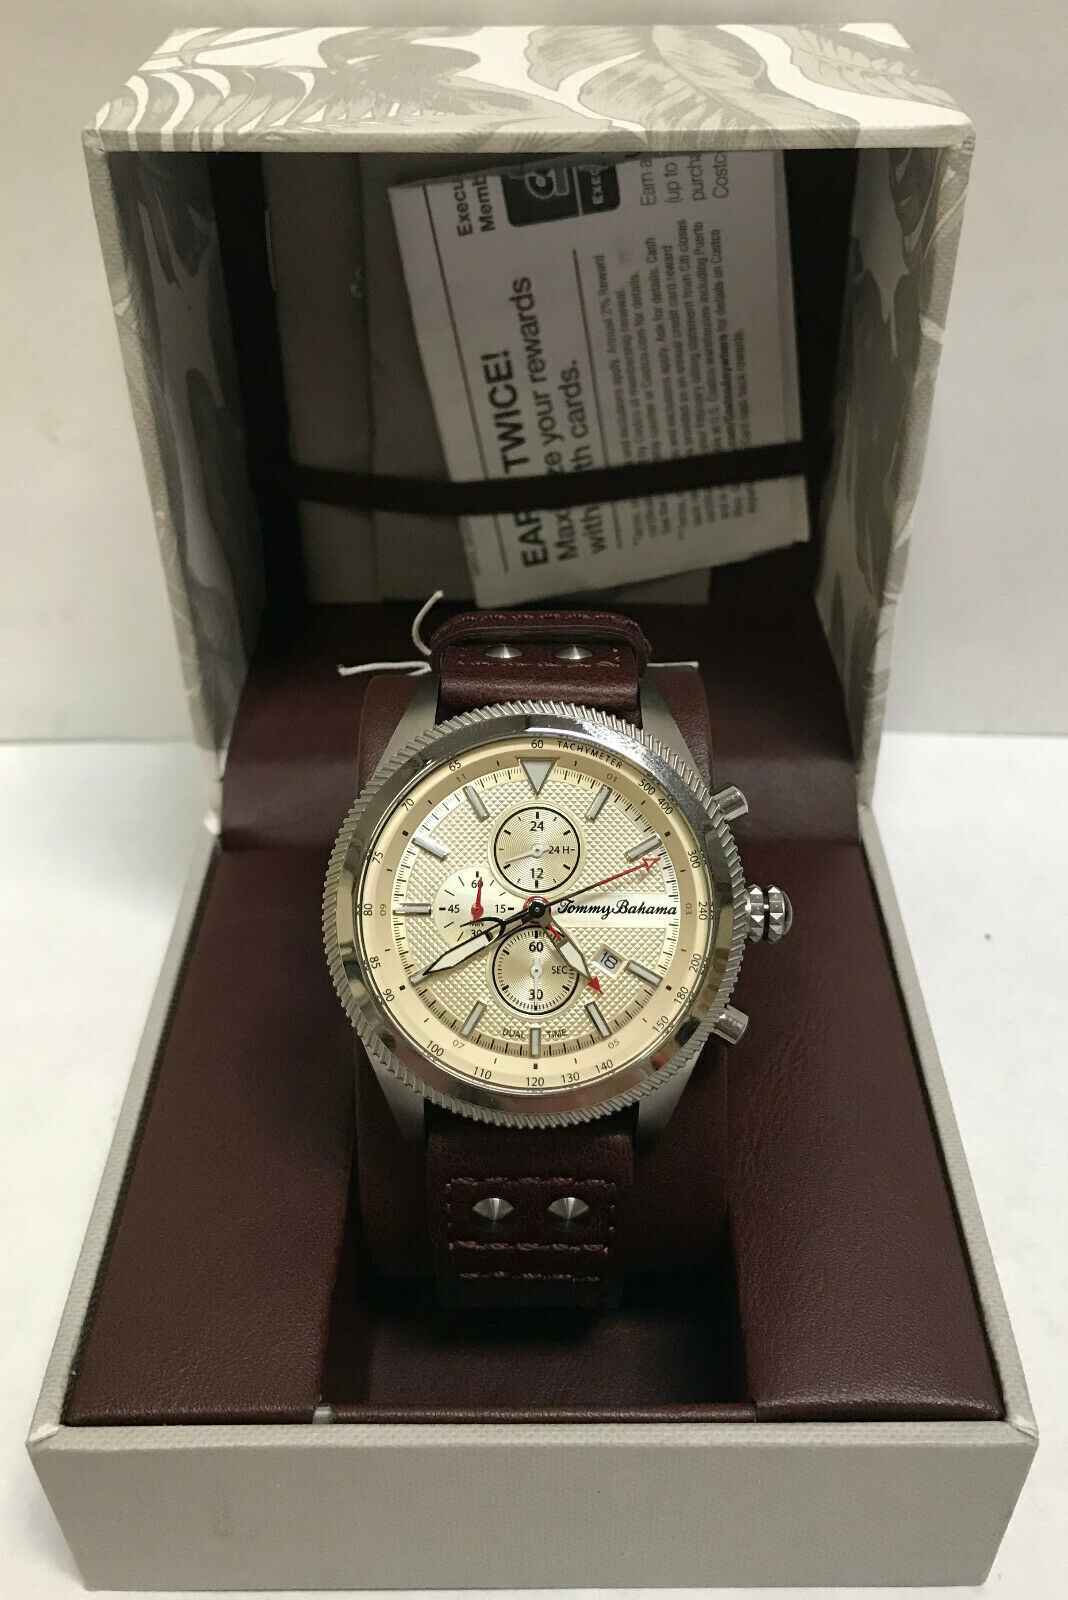 tommy bahama wrist watches